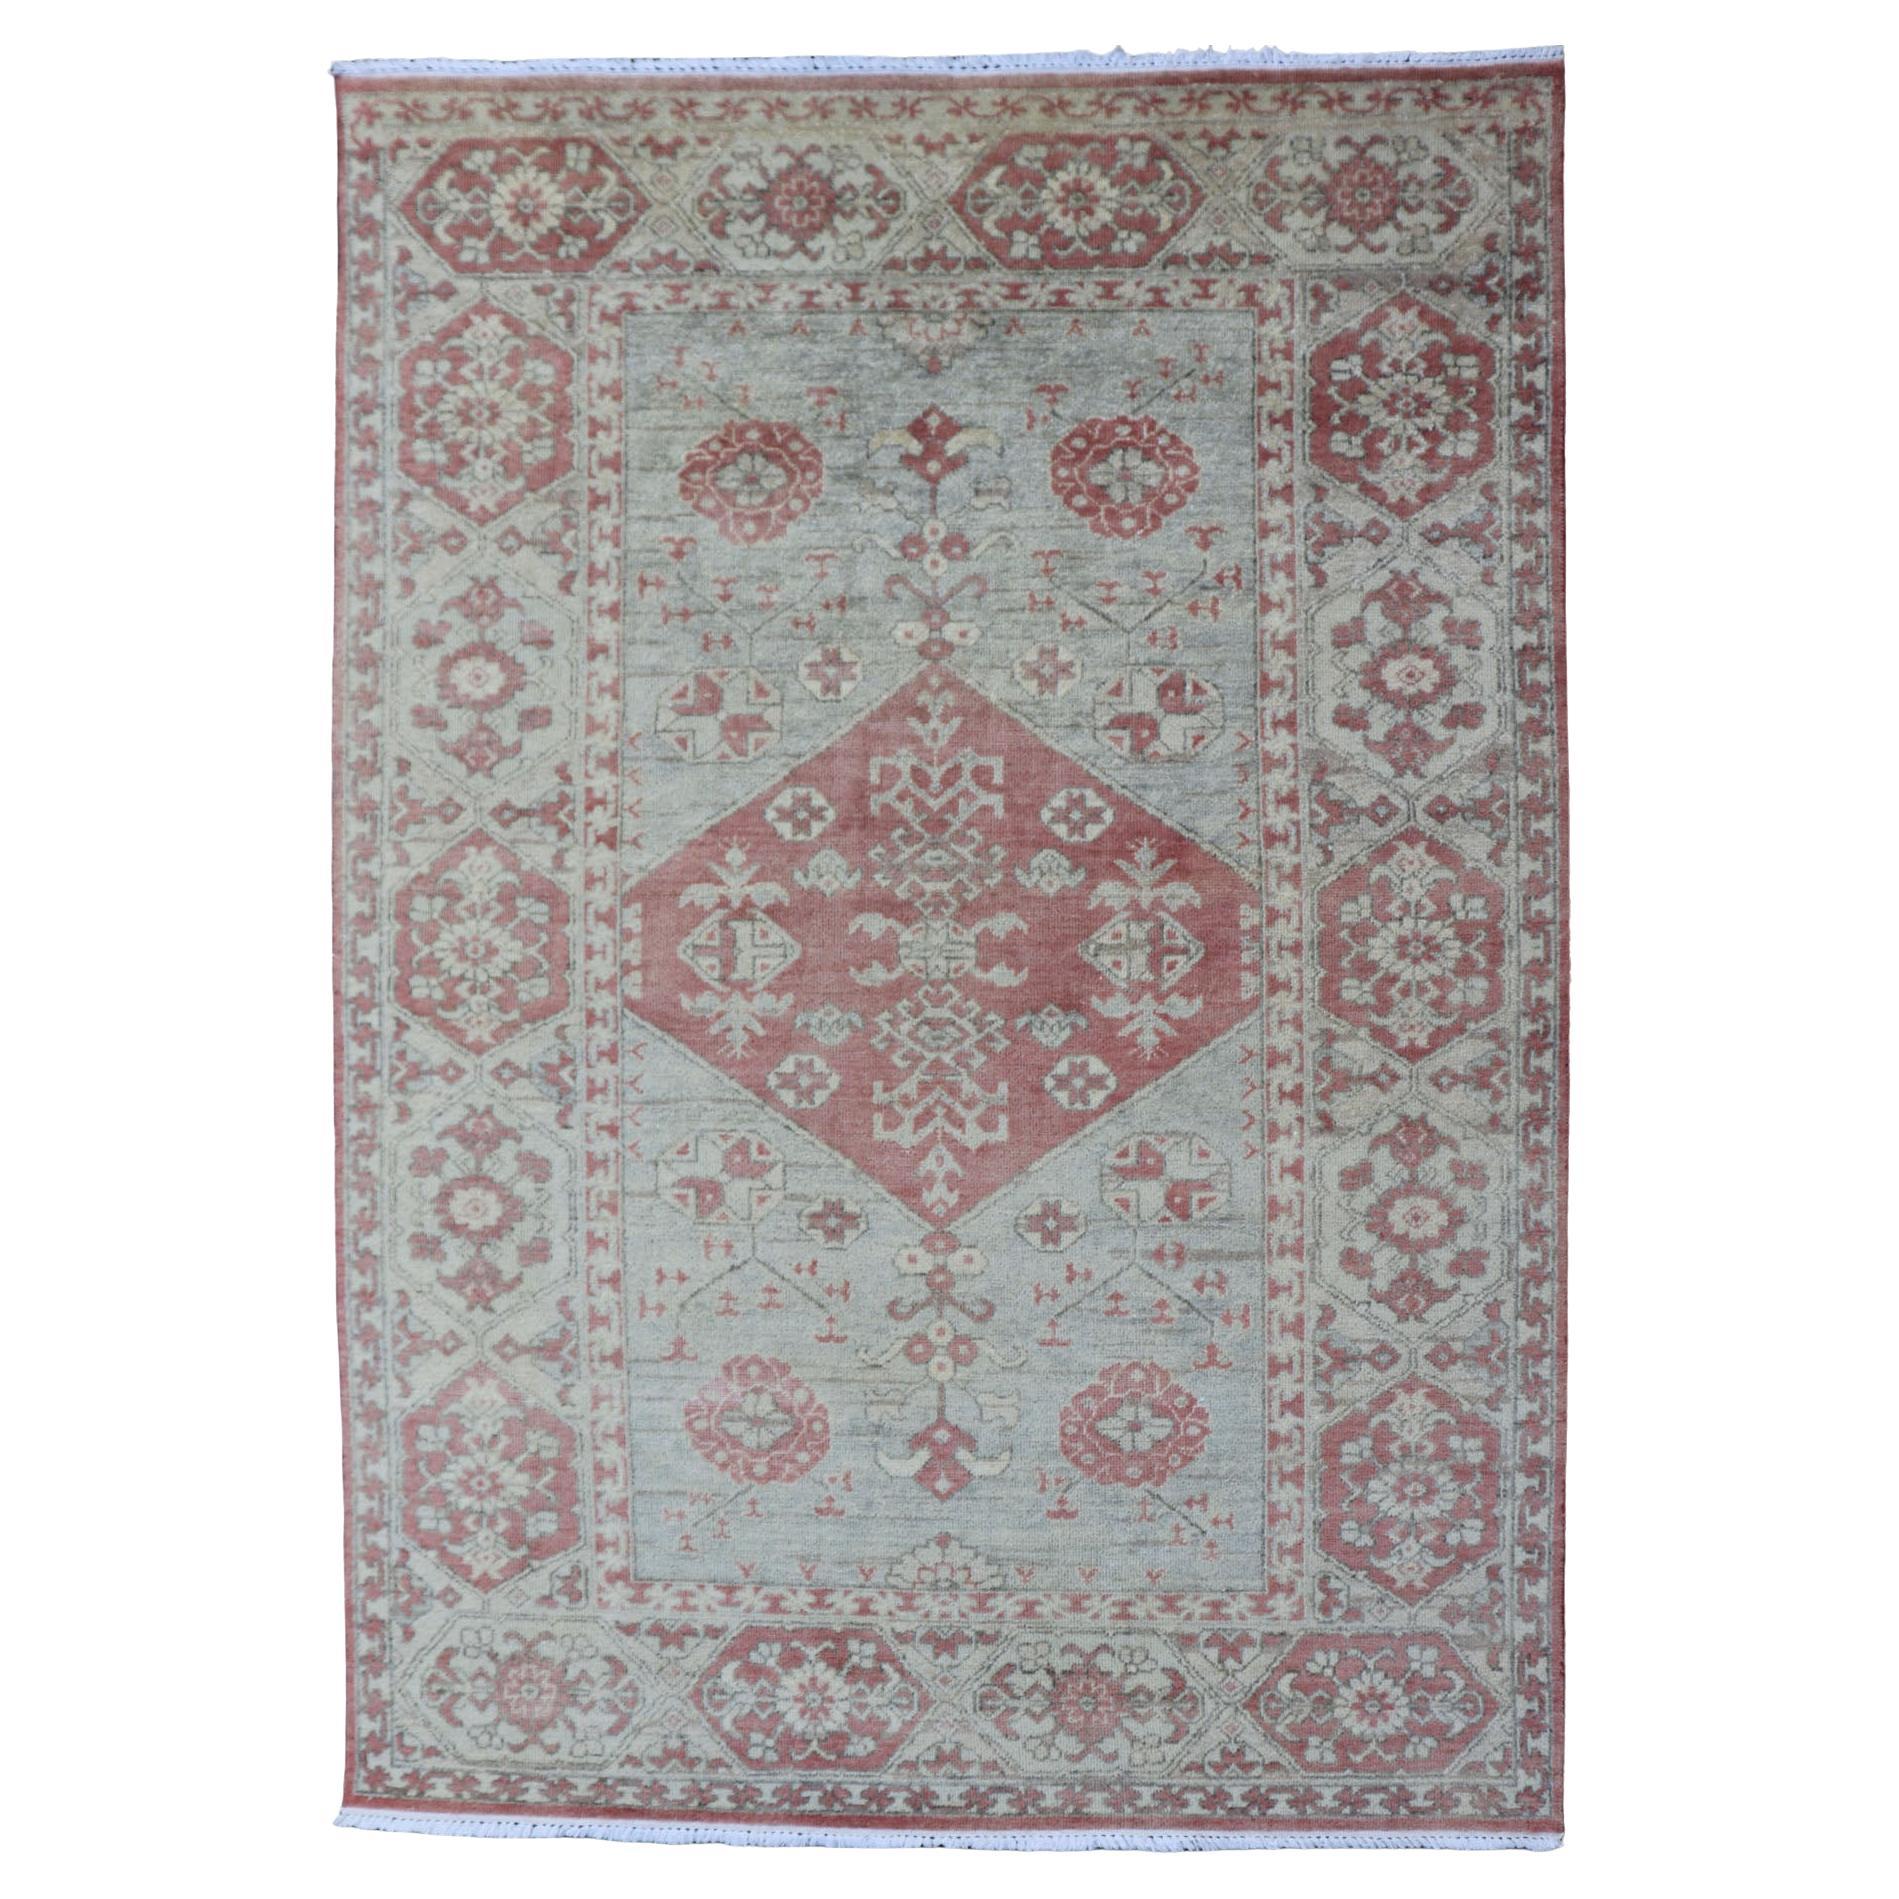 Keivan Woven Arts Oushak Rug in Light Blue and Coral   5'10 x 8'10